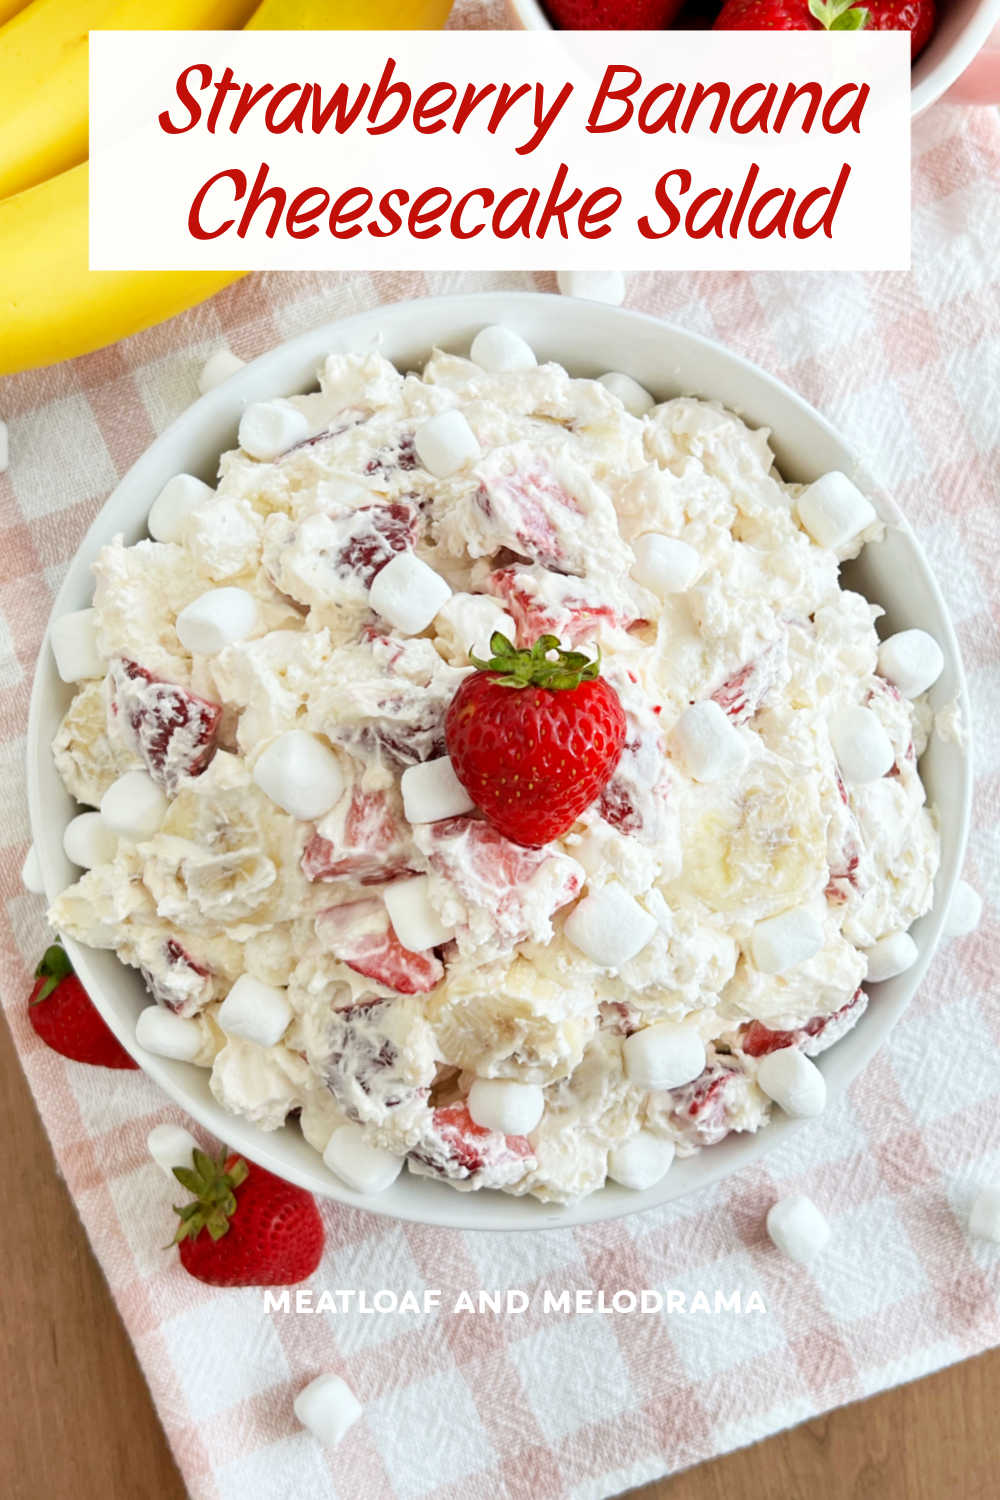 Easy Strawberry Banana Cheesecake Salad recipe combines fresh strawberries with sweet bananas in a creamy cheesecake filling. This delicious dessert salad is the perfect side dish for a church potluck, summer BBQ or family gathering! via @meamel